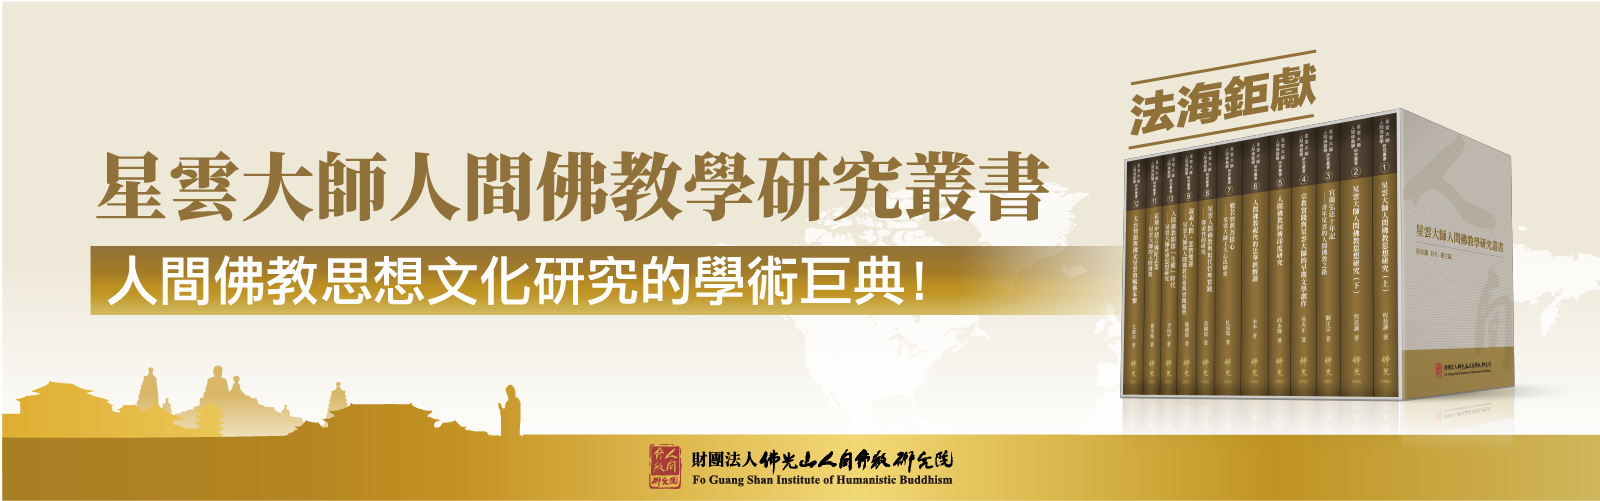 Banner-1205修改.png